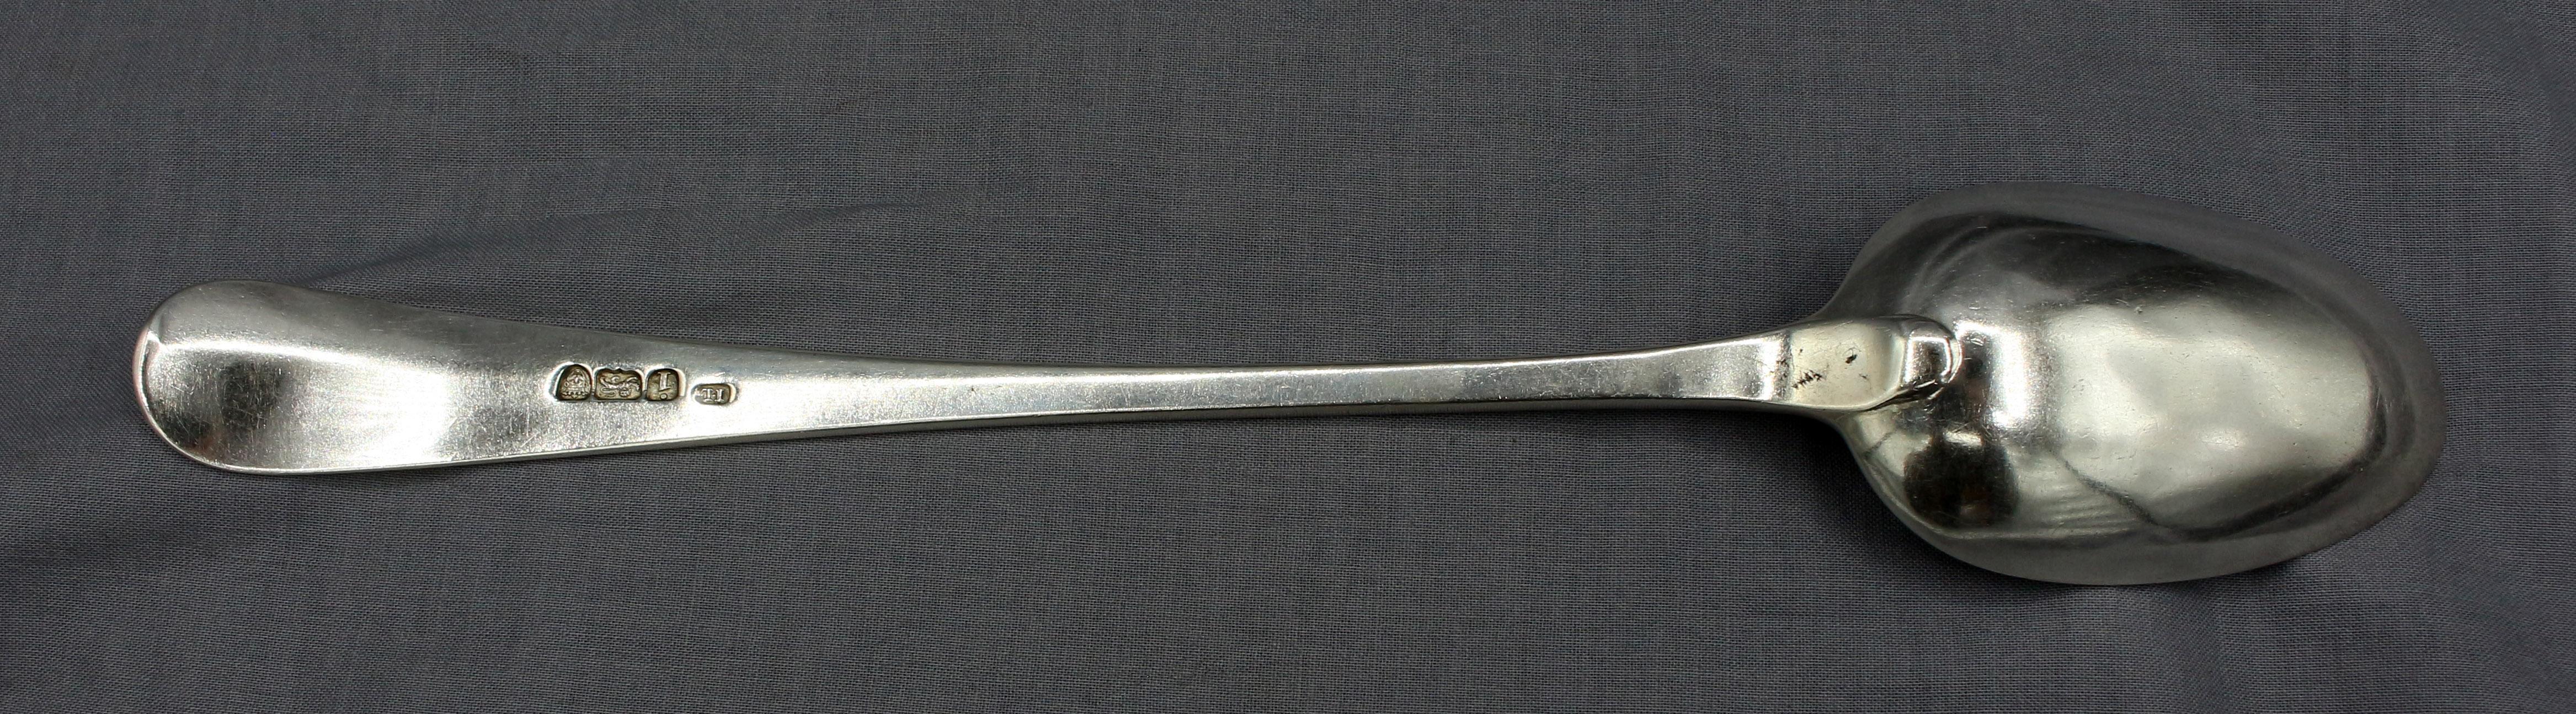 London, 1784, Old English Engraved sterling silver basting spoon. George III period by John Lamb (2nd mark of 1782) working 29 Fetter Lane. Monogram 